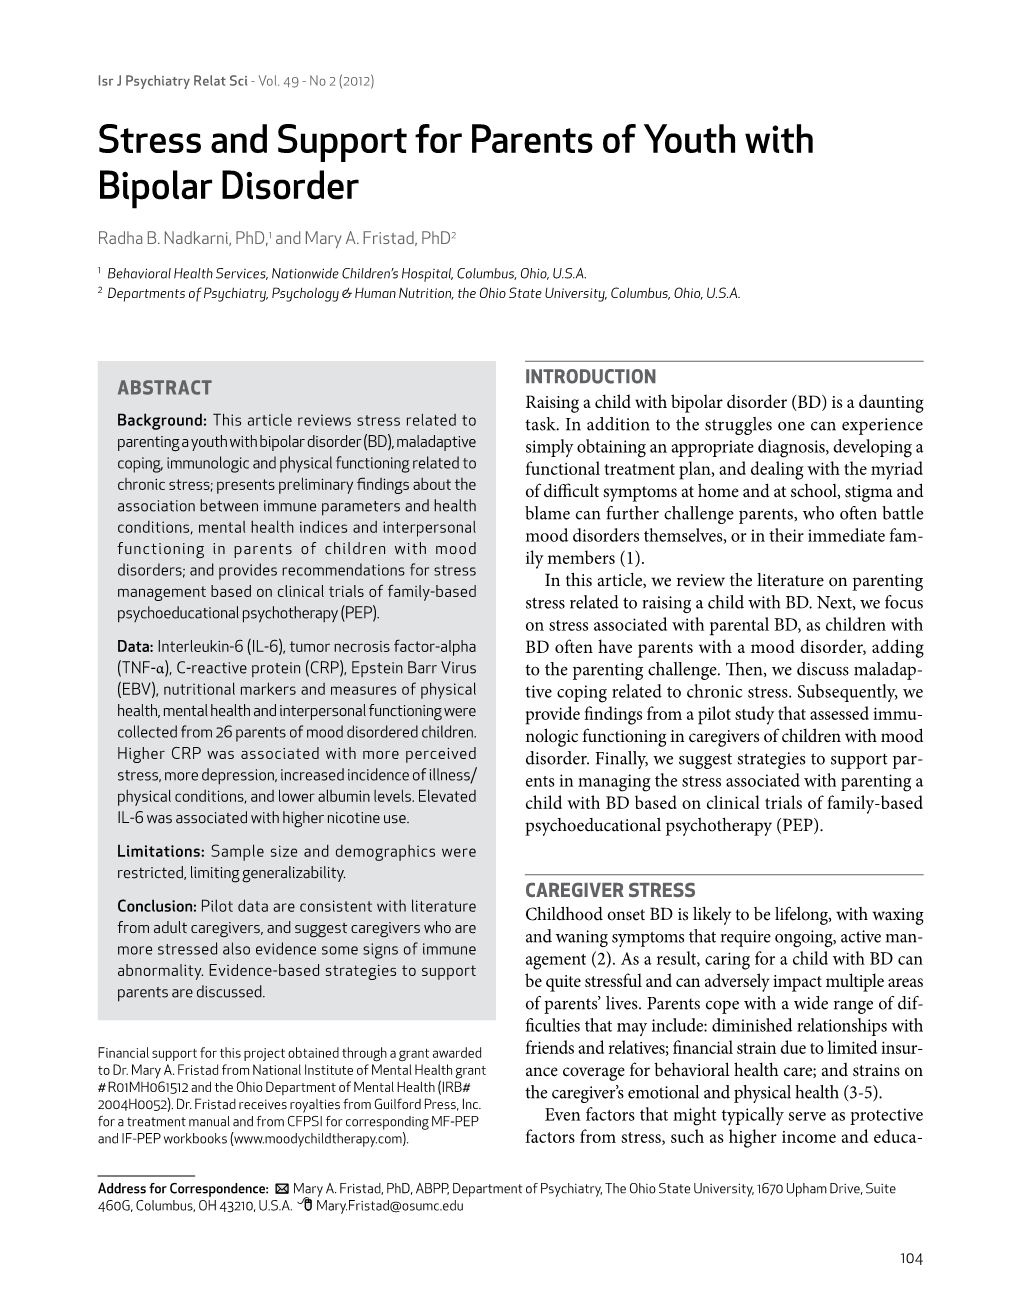 Stress and Support for Parents of Youth with Bipolar Disorder